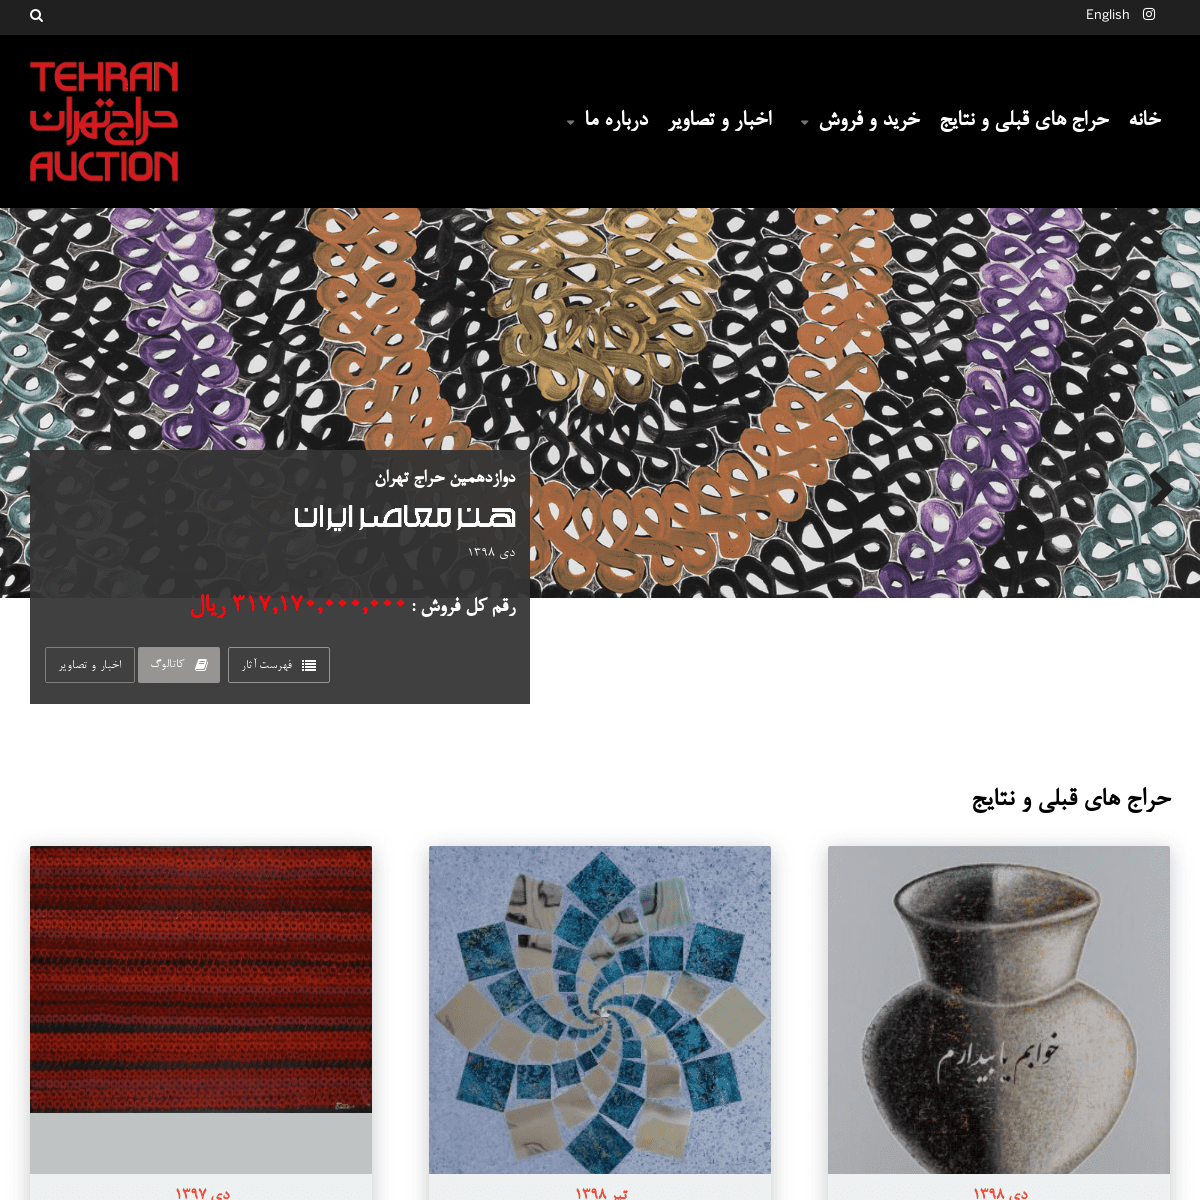 A complete backup of tehranauction.com